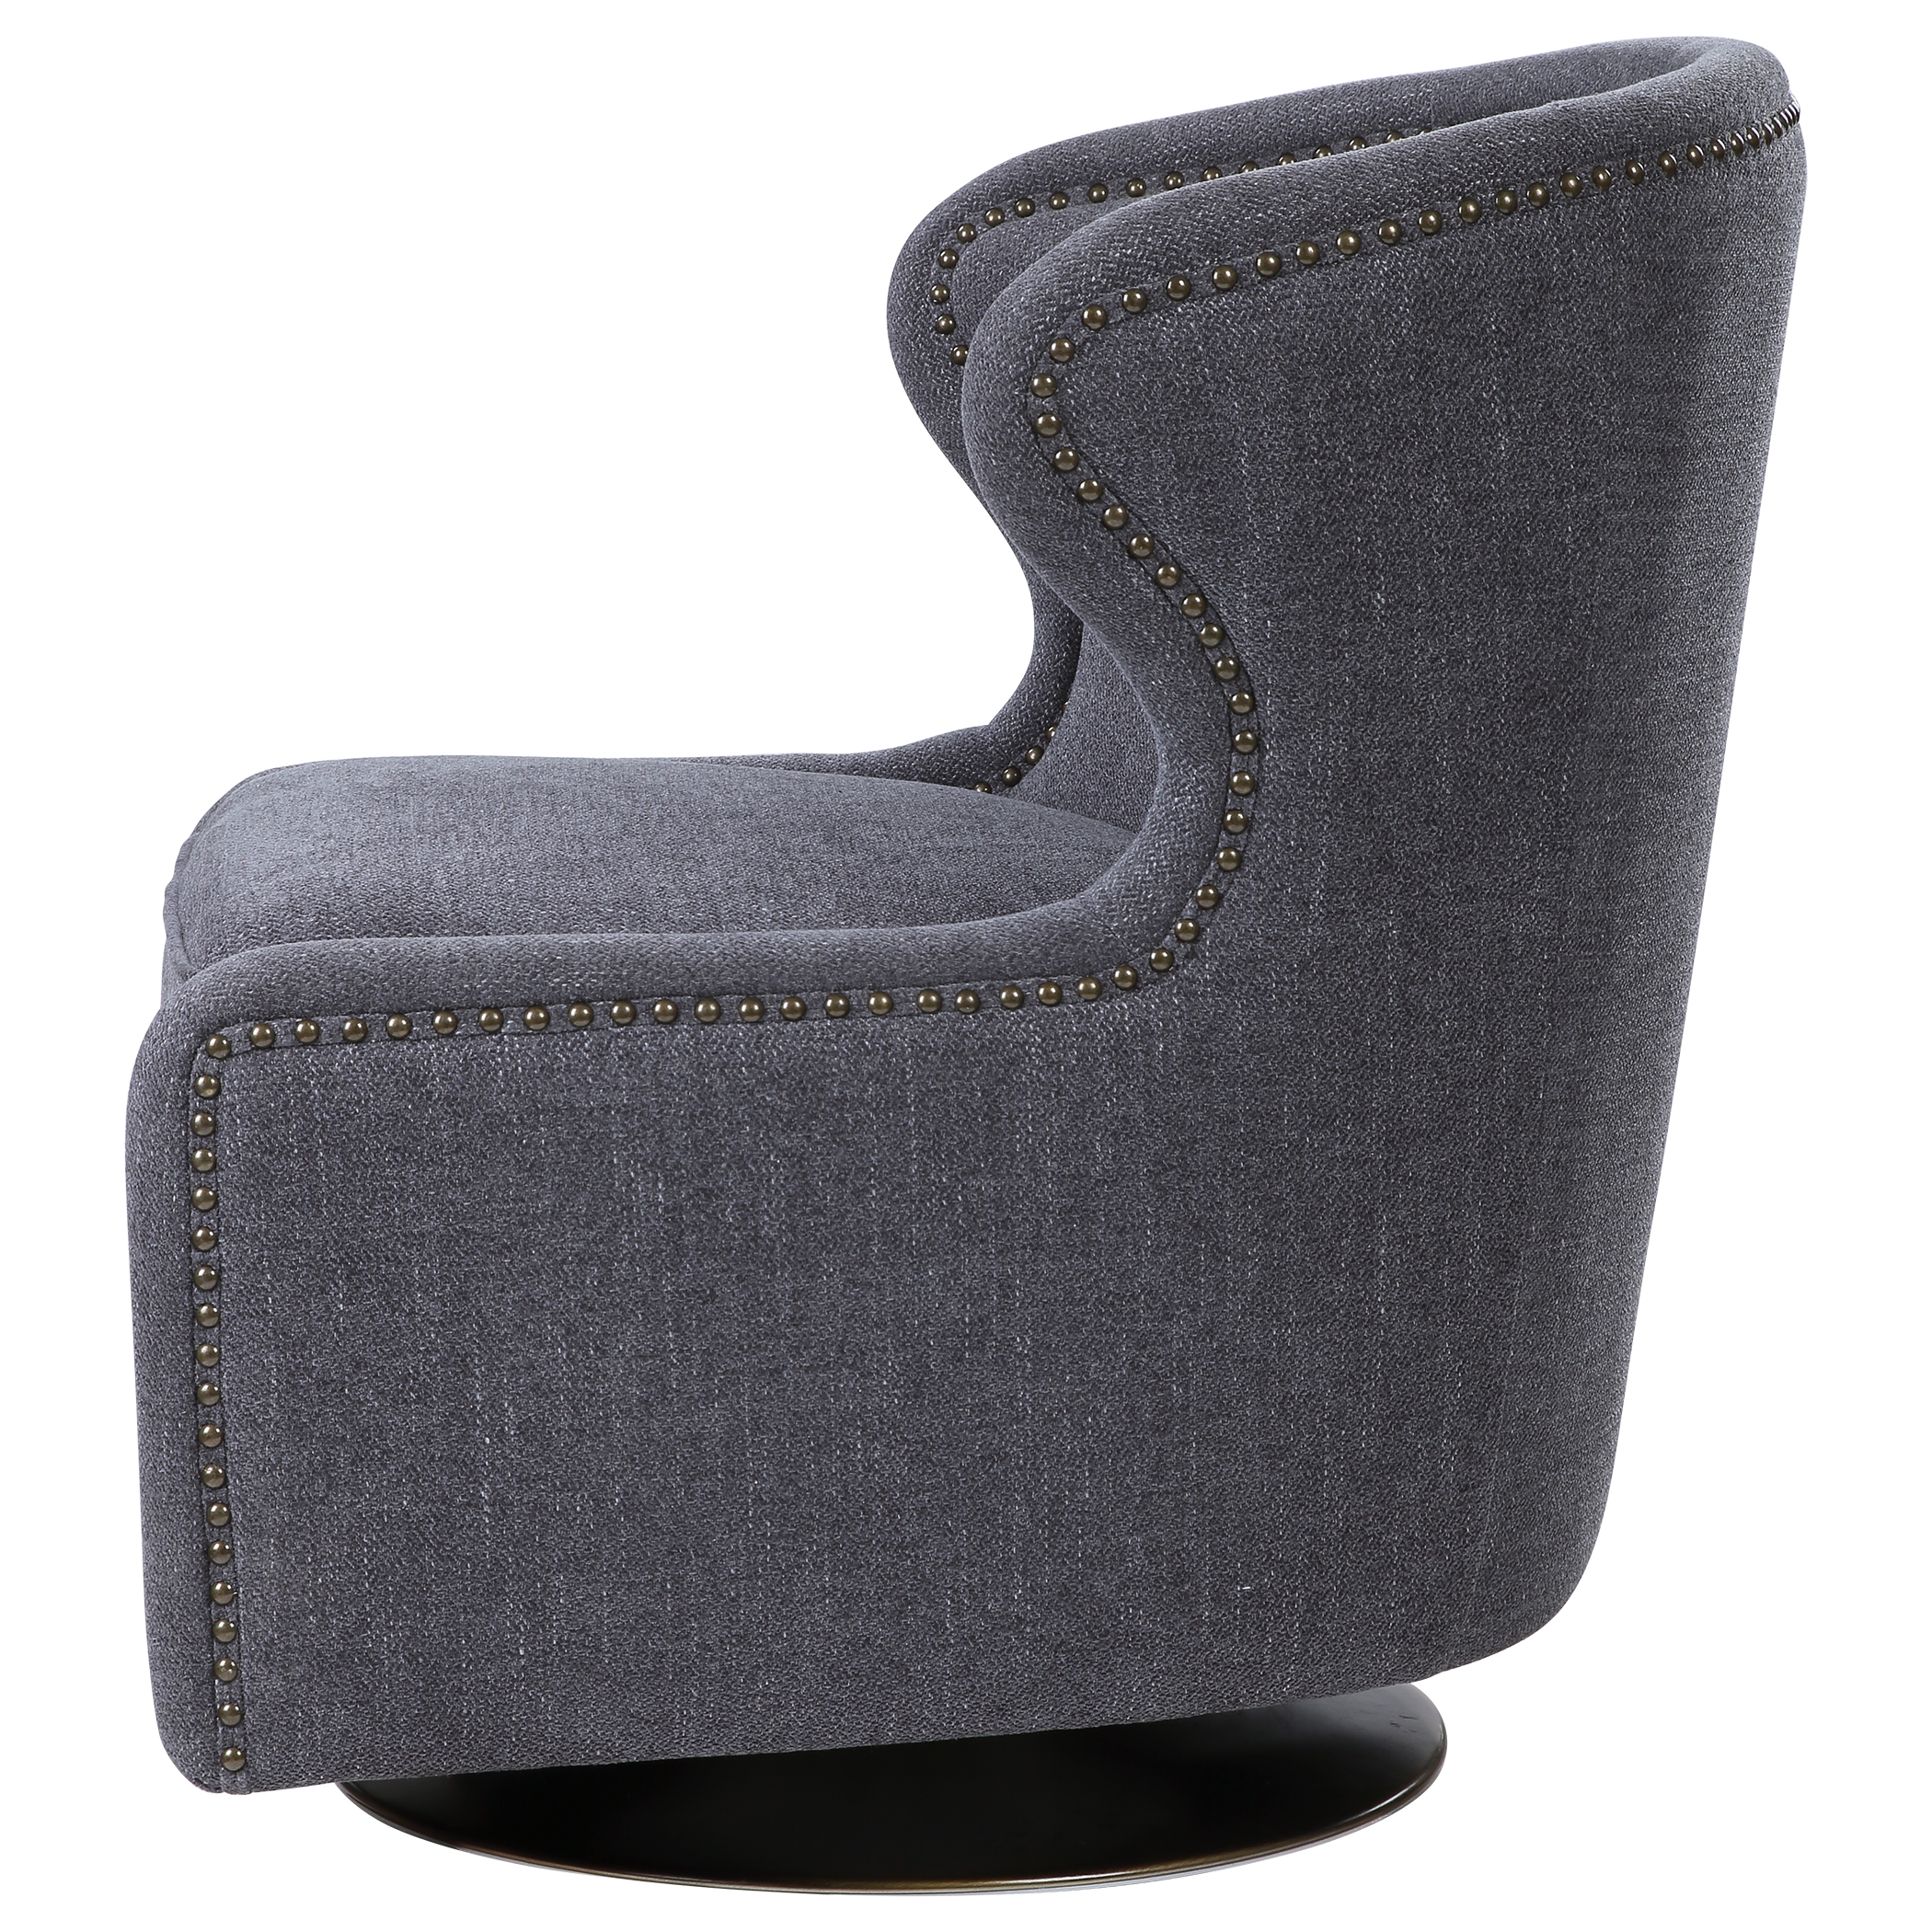 Biscay Swivel Chair - Image 4